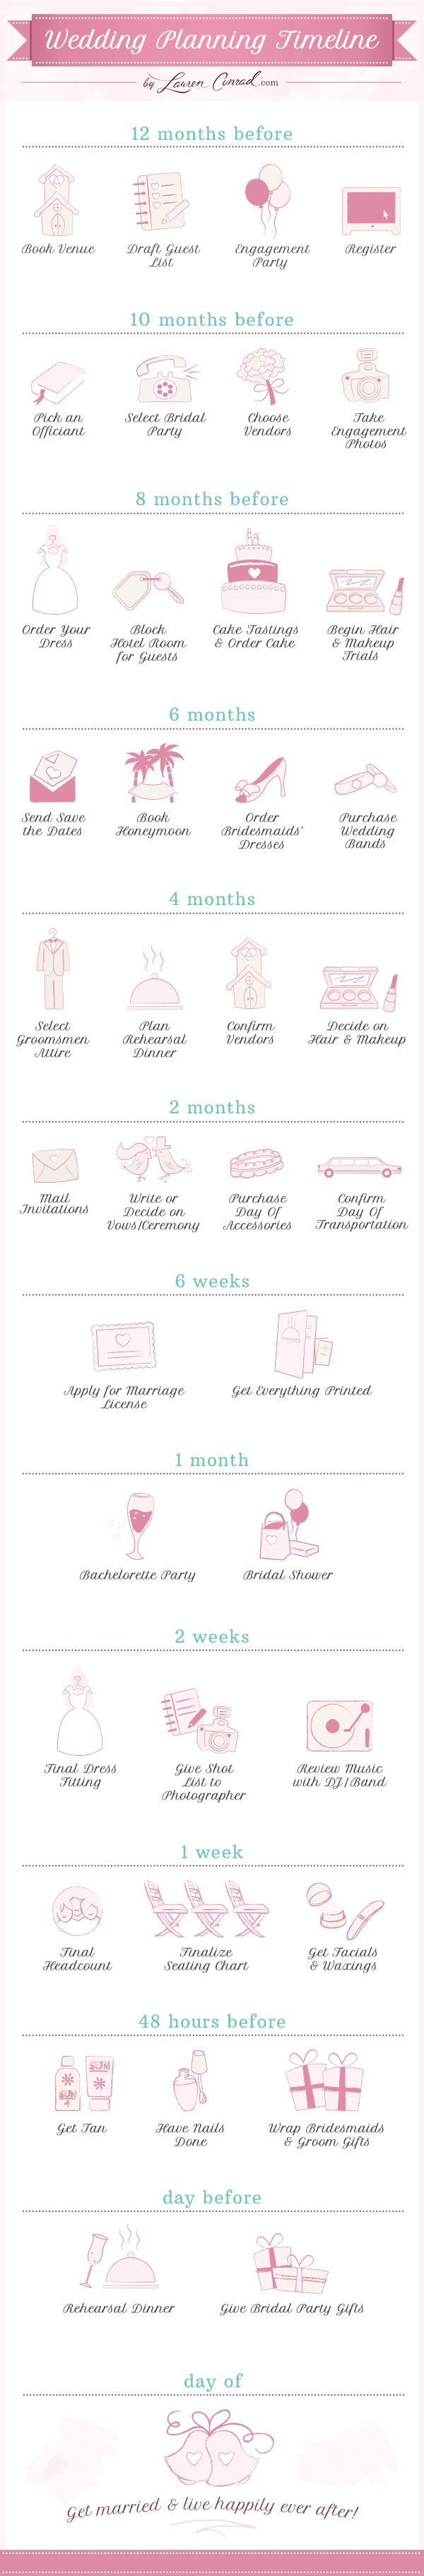 the wedding planning timeline {so informative! pin now, read later}